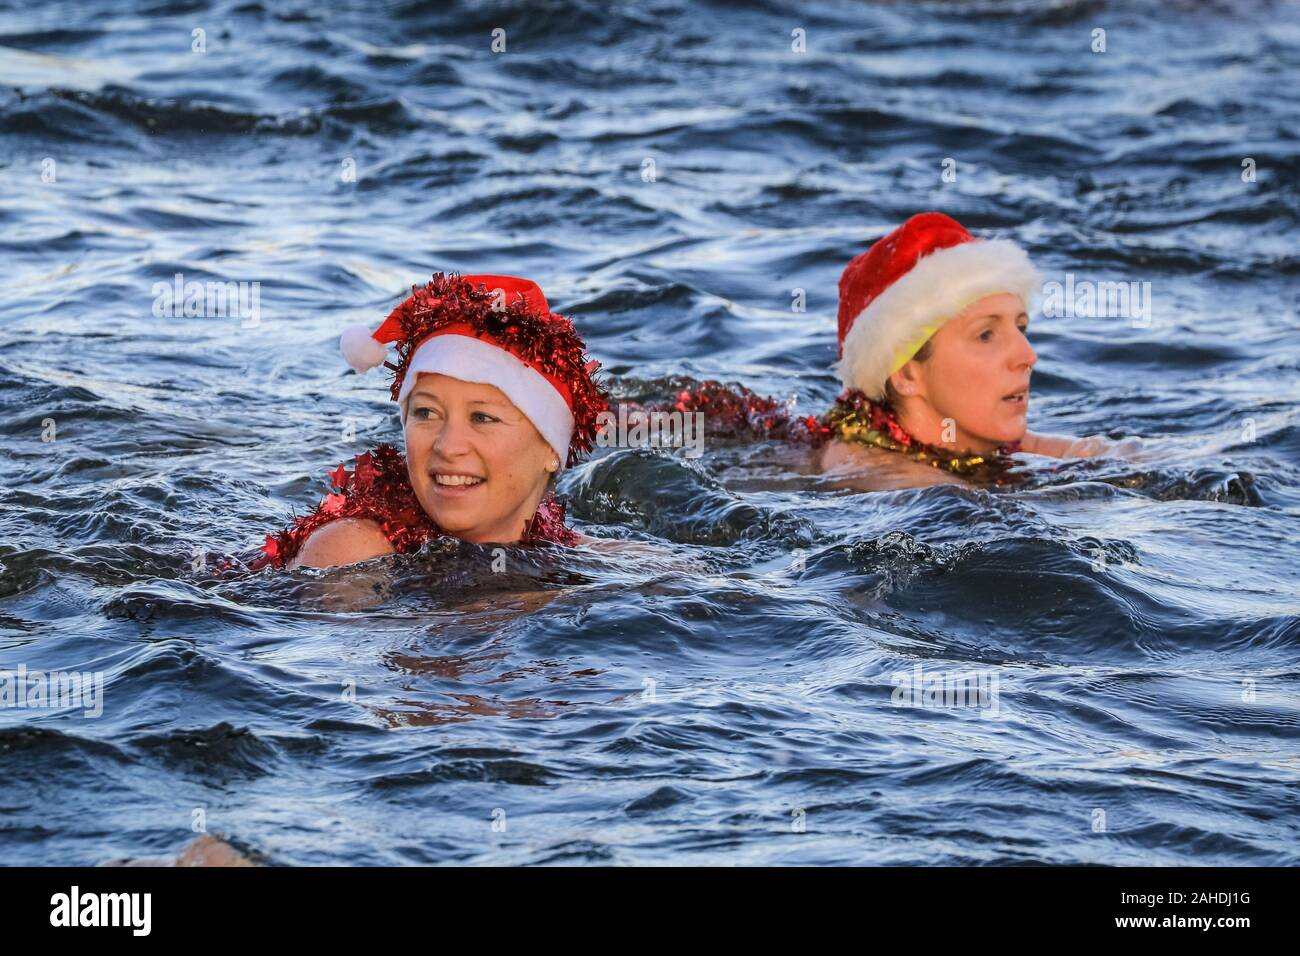 Christmas Day swimmers in Santa hat swim in cold open water at the swimming  race for the 'Peter Pan Cup', Serpentine Swimming Club, Hyde Park, London  Stock Photo - Alamy